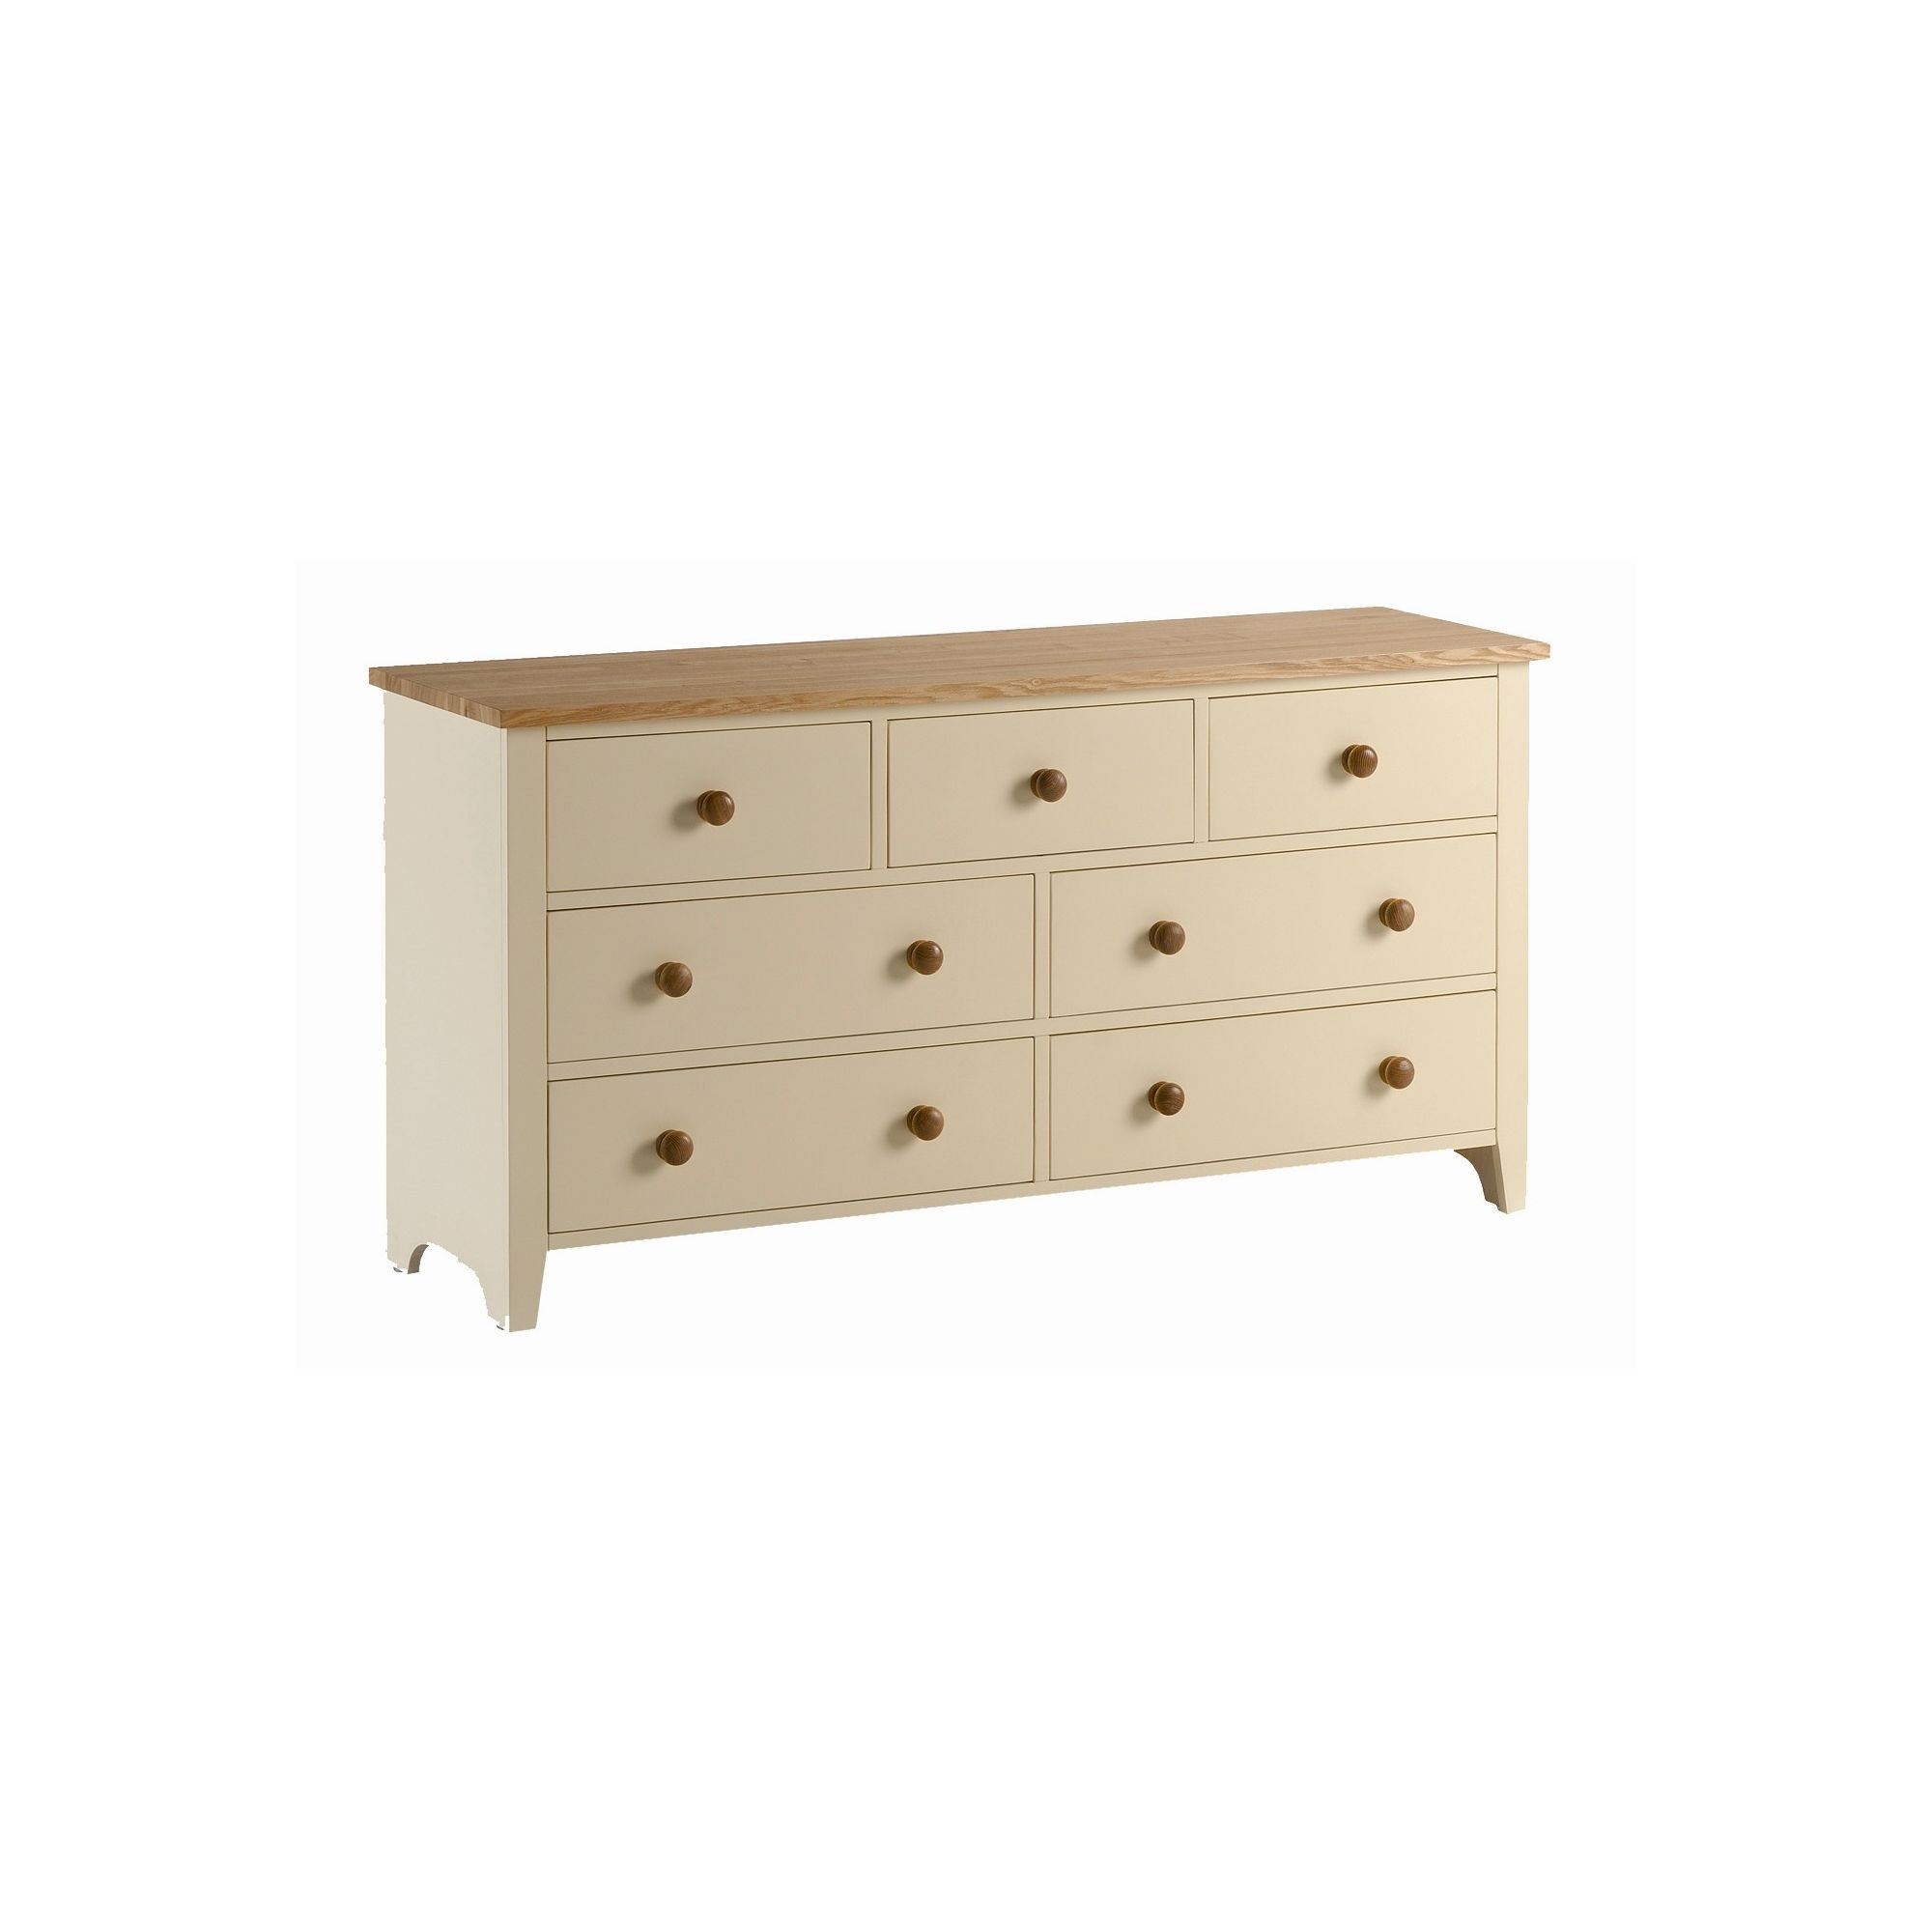 Kelburn Furniture Fanshawe Painted 3 Over 4 Chest in Ivory at Tesco Direct